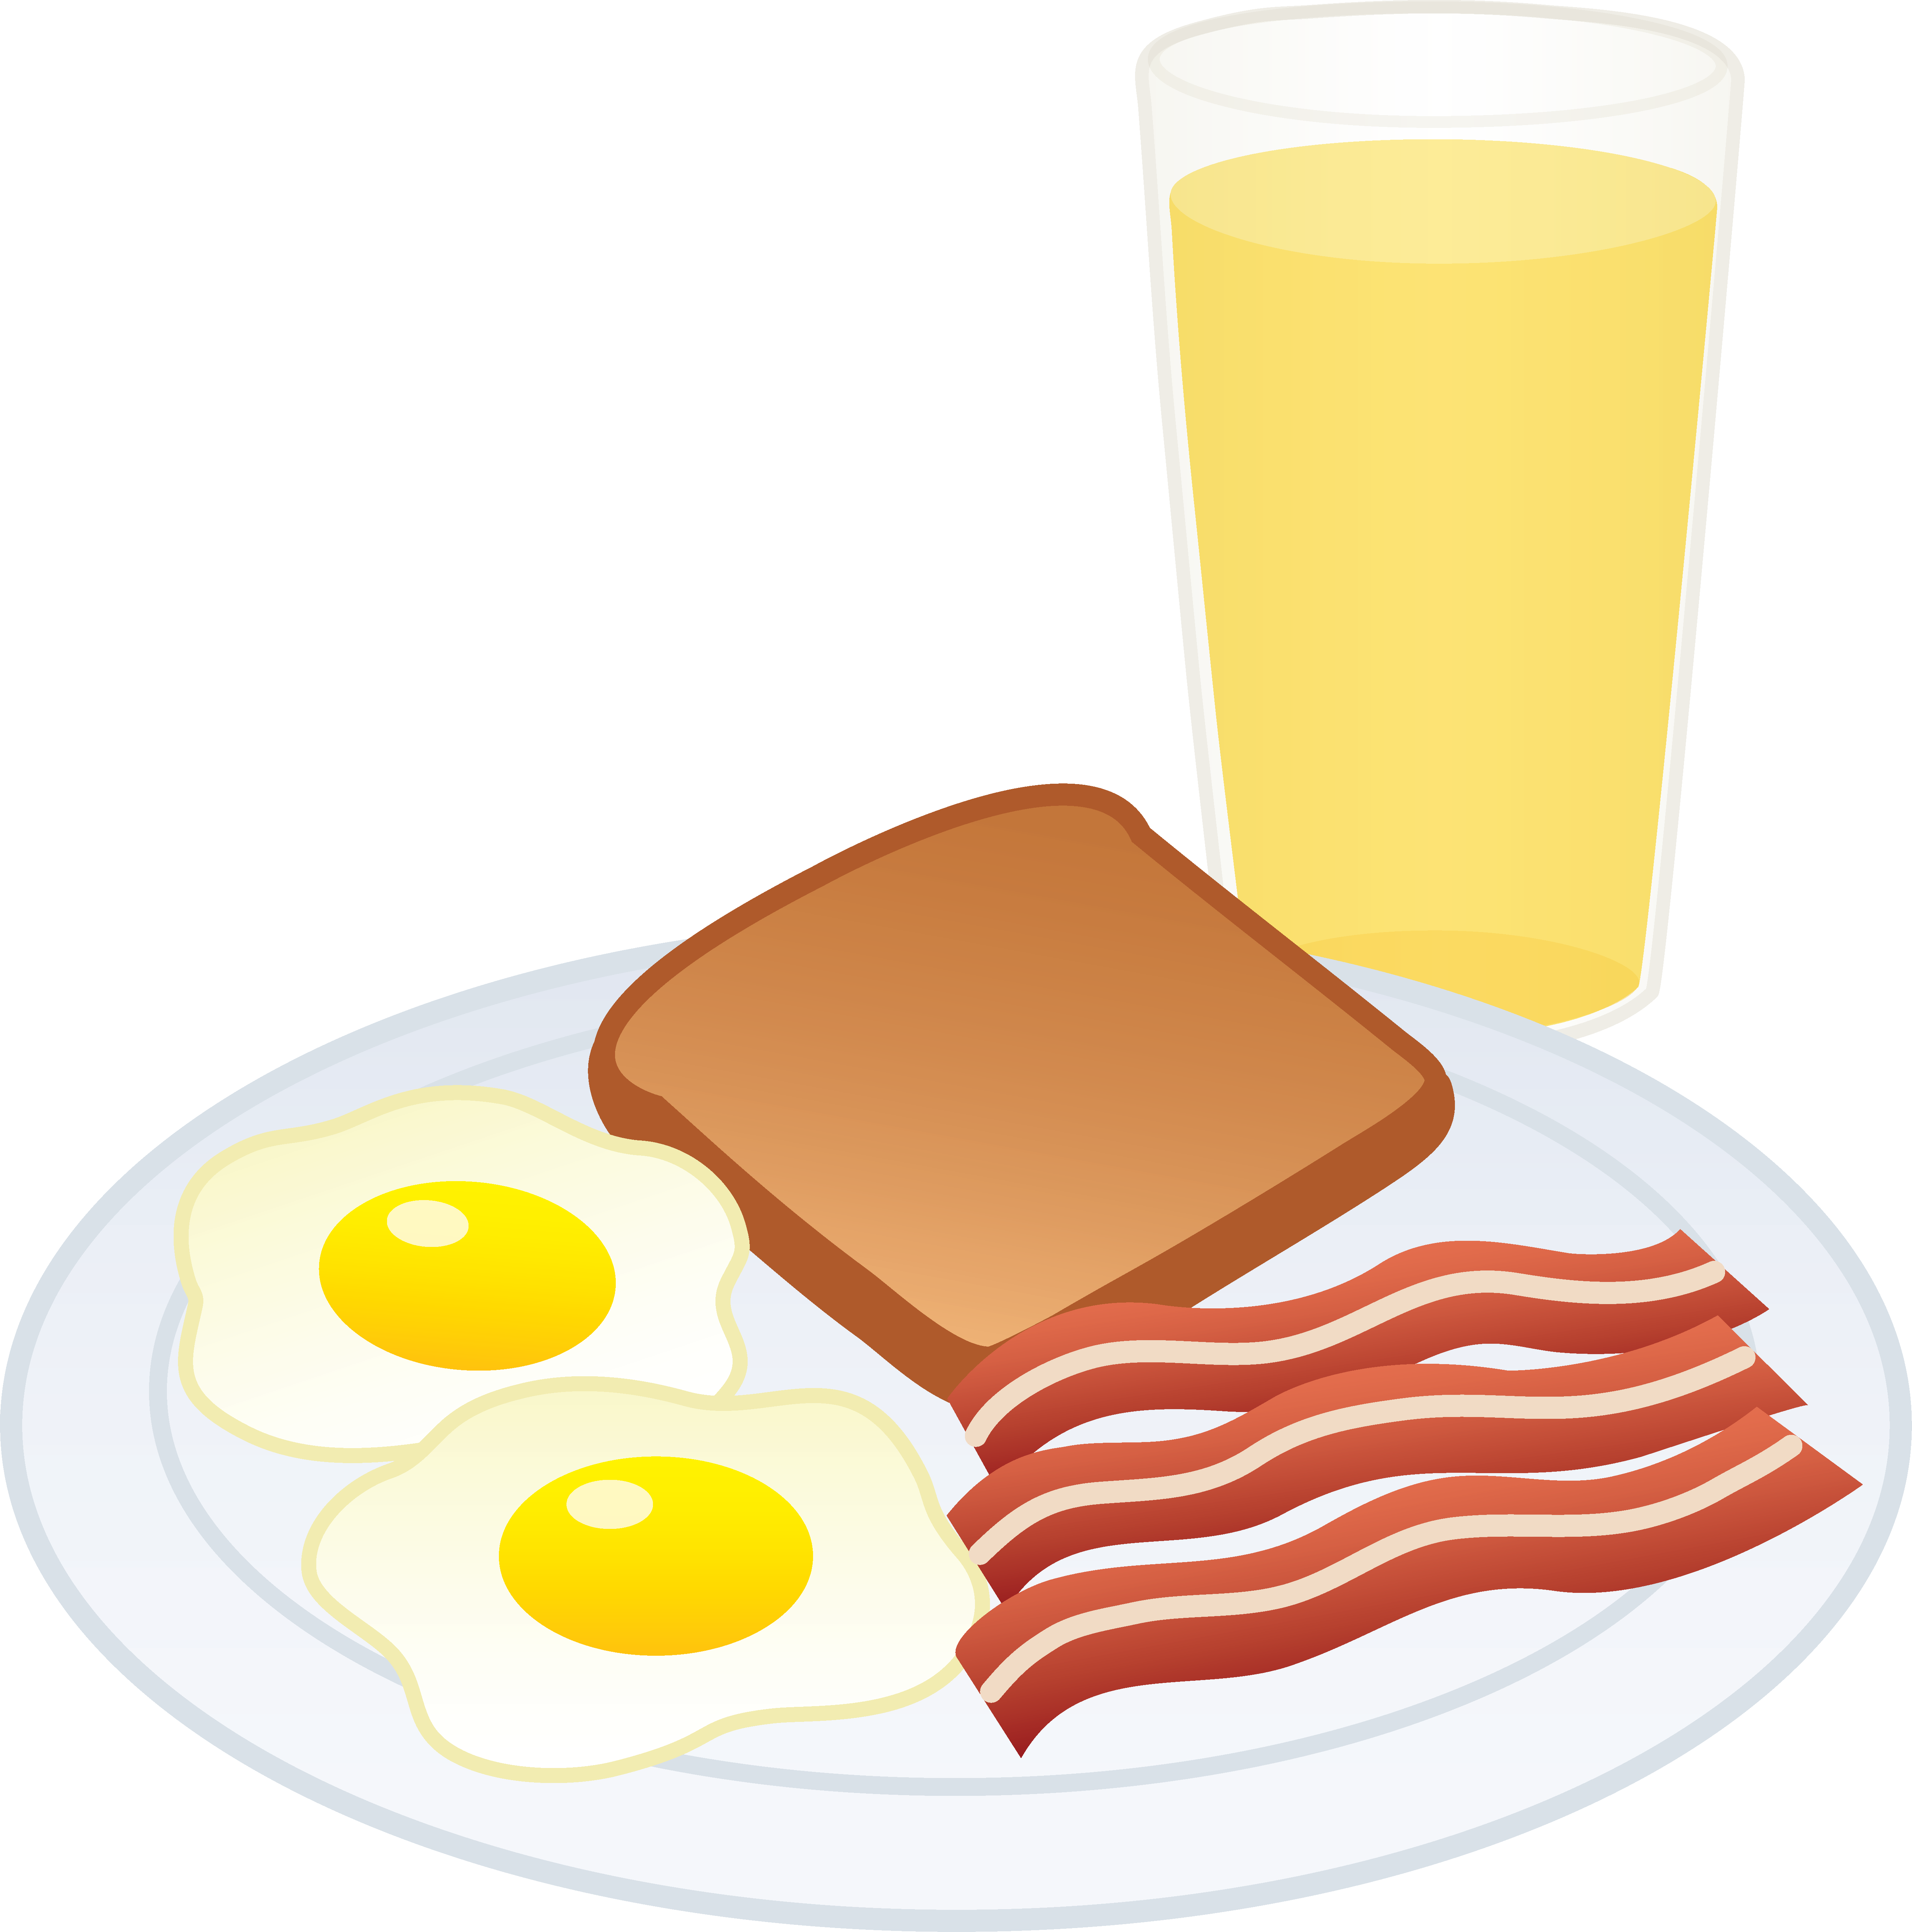 Eggs clipart plate. Breakfast free panda images